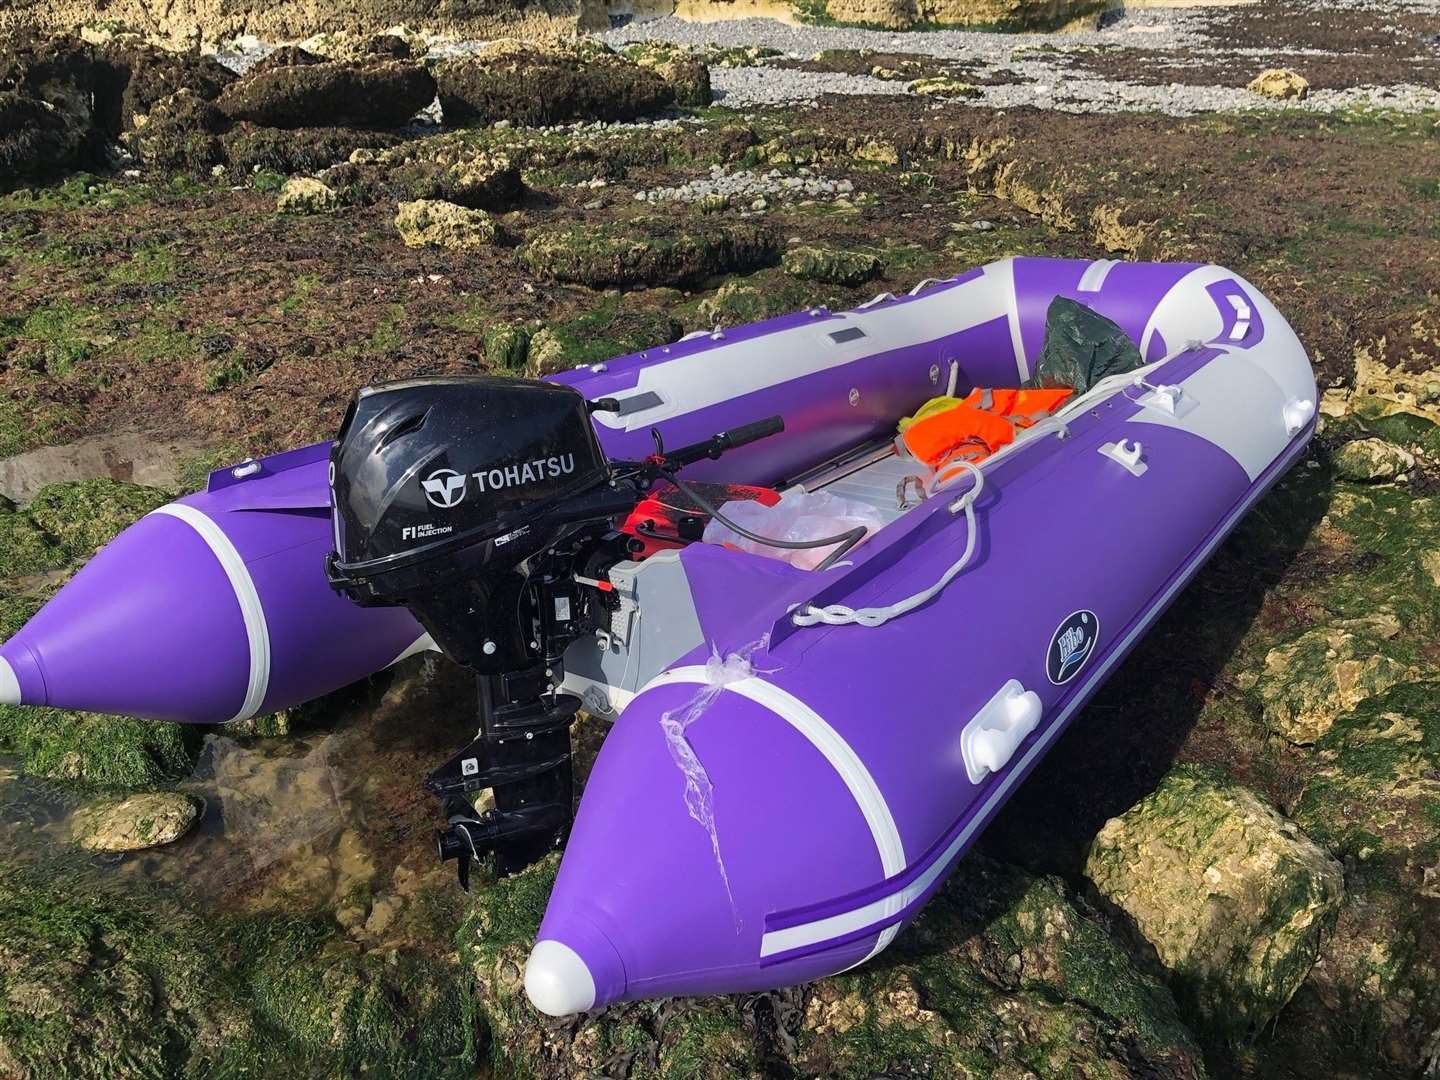 The abandoned dinghy contained a number of lifejackets